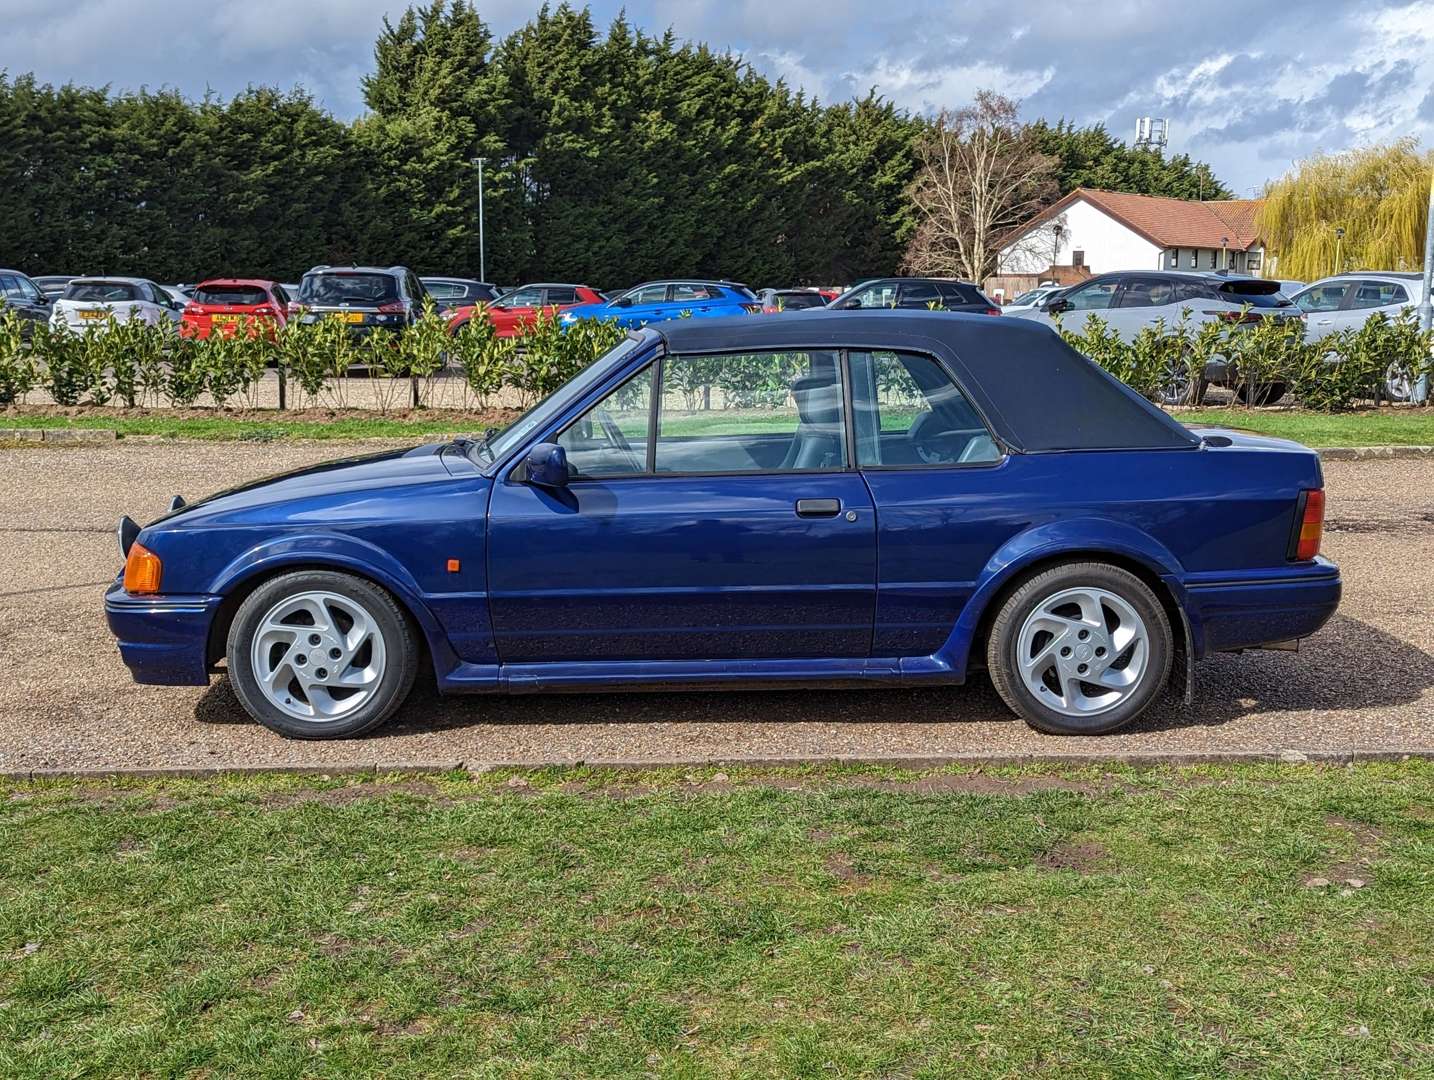 1990 FORD ESCORT XR3I CONVERTIBLE SE500 - Image 4 of 29